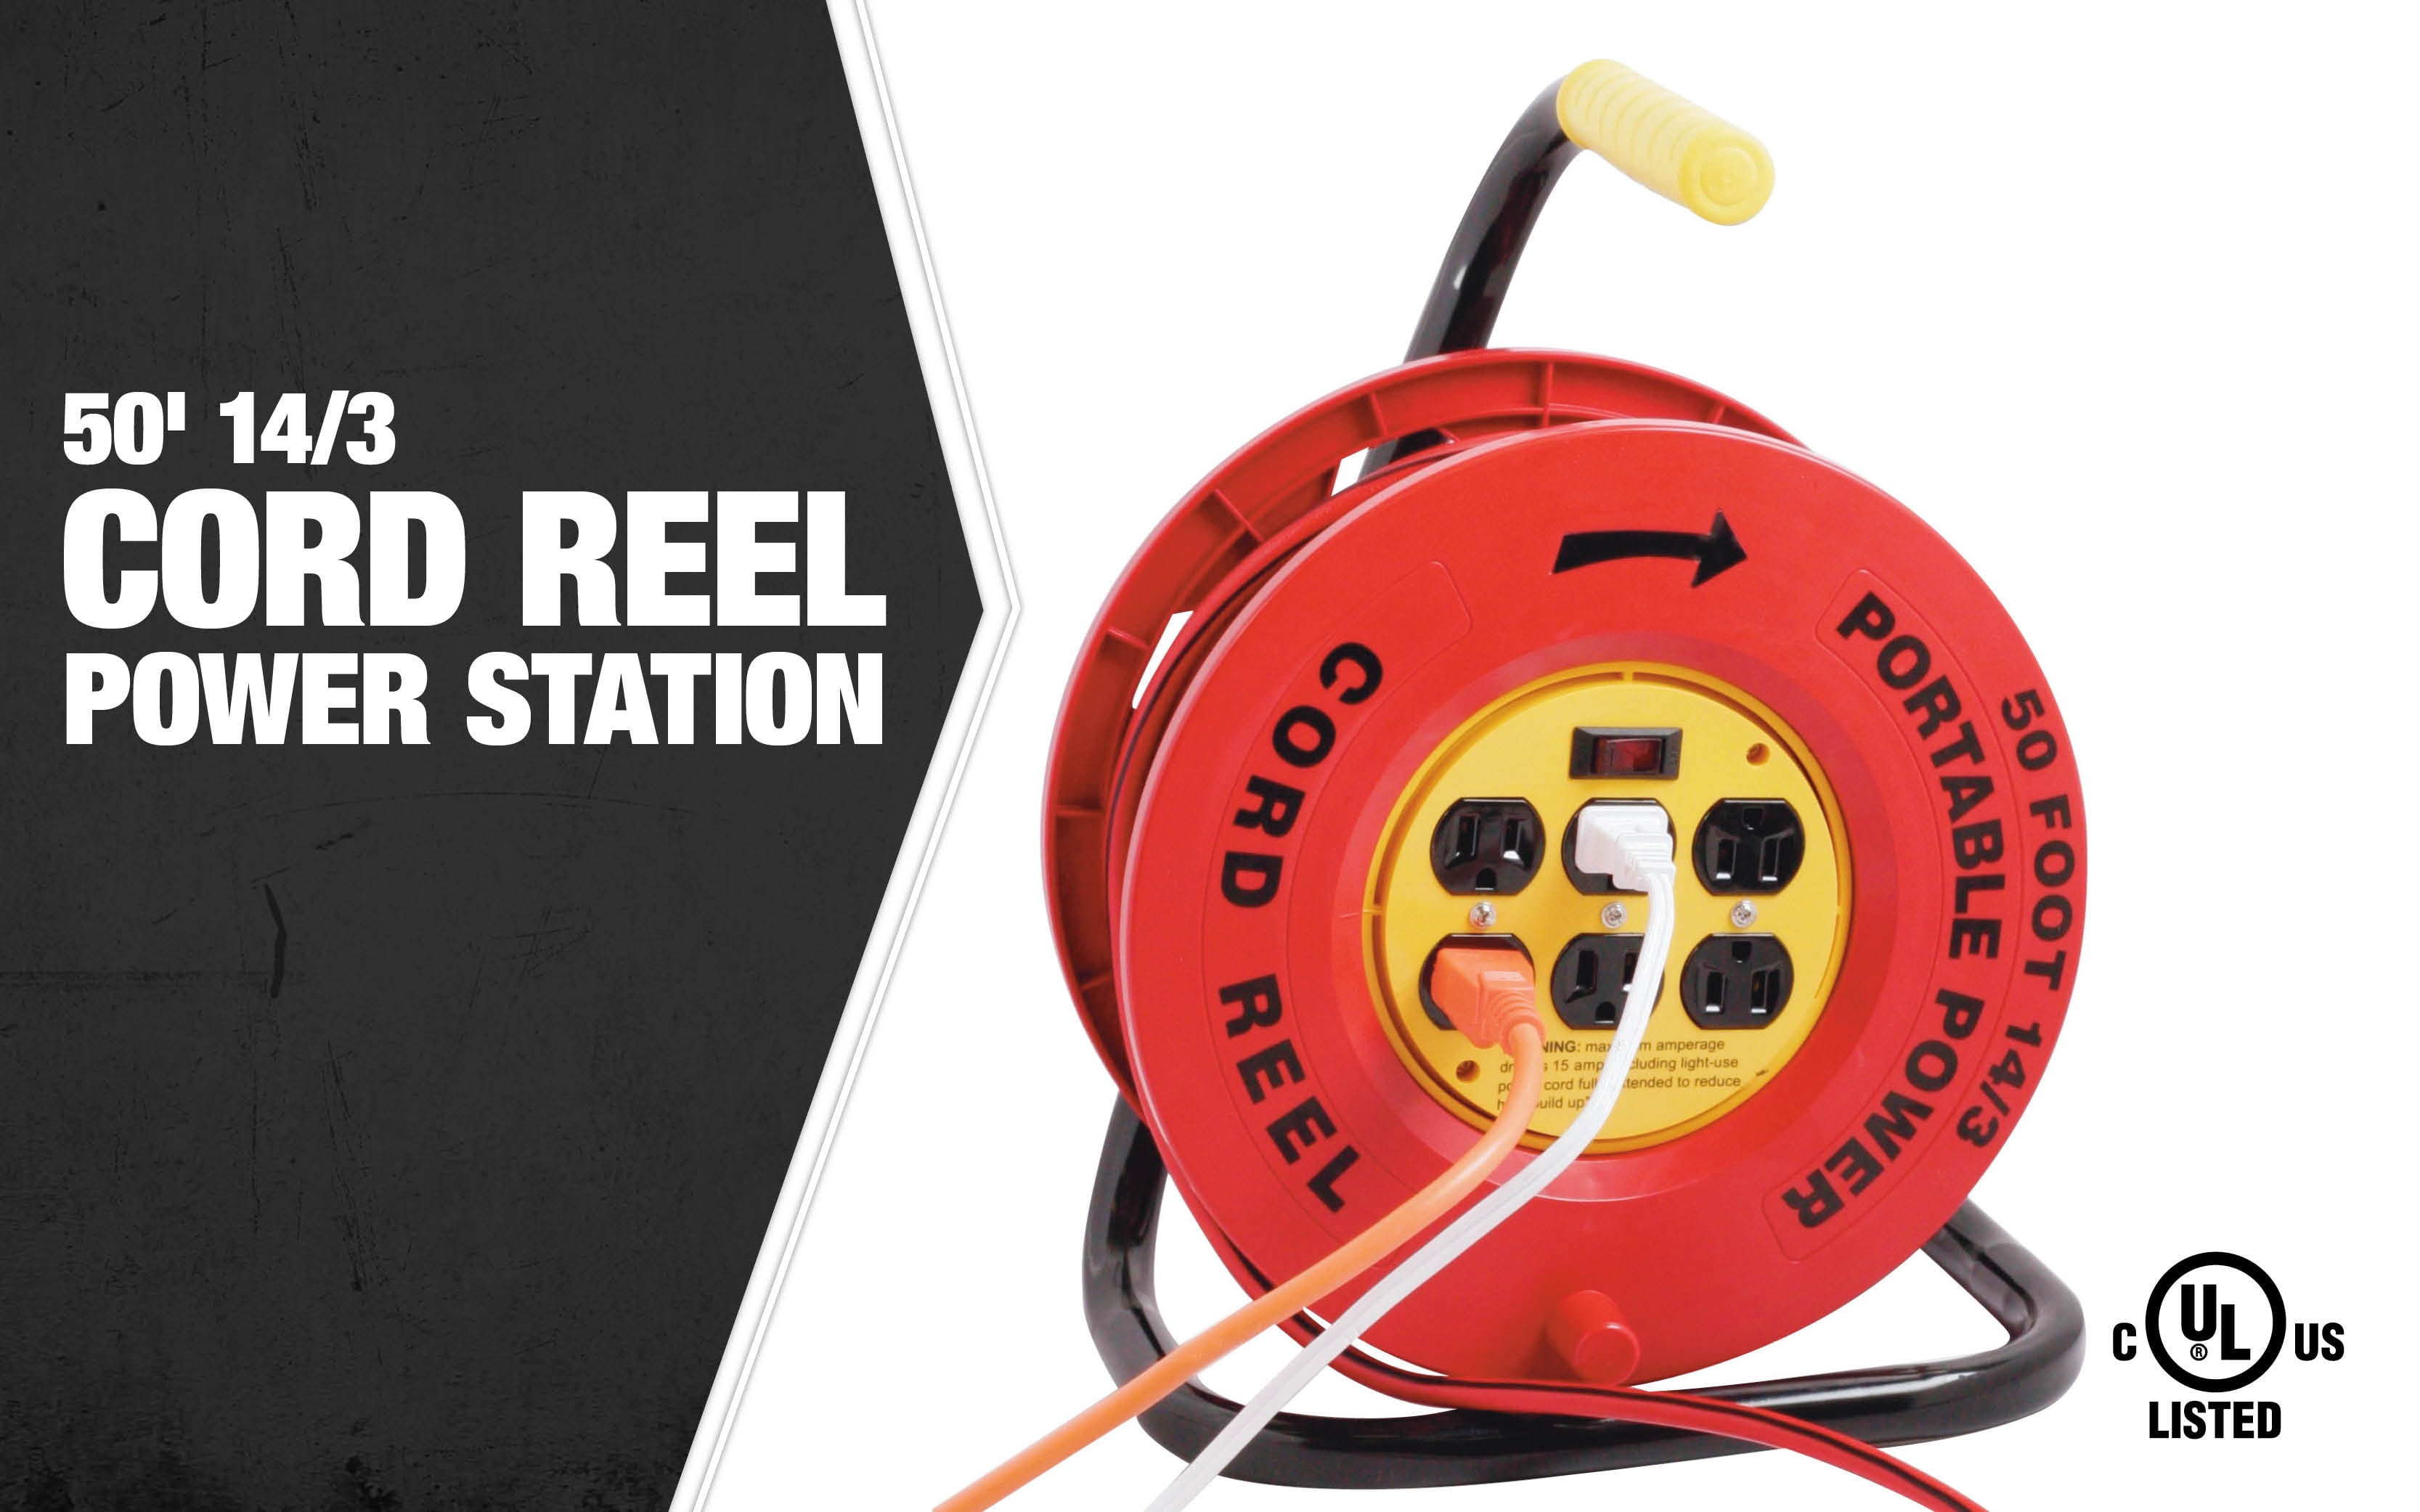 25 Foot, Yellow Woods 2801 Extension Cord Reel With Four 3-Prong Power Outlets 